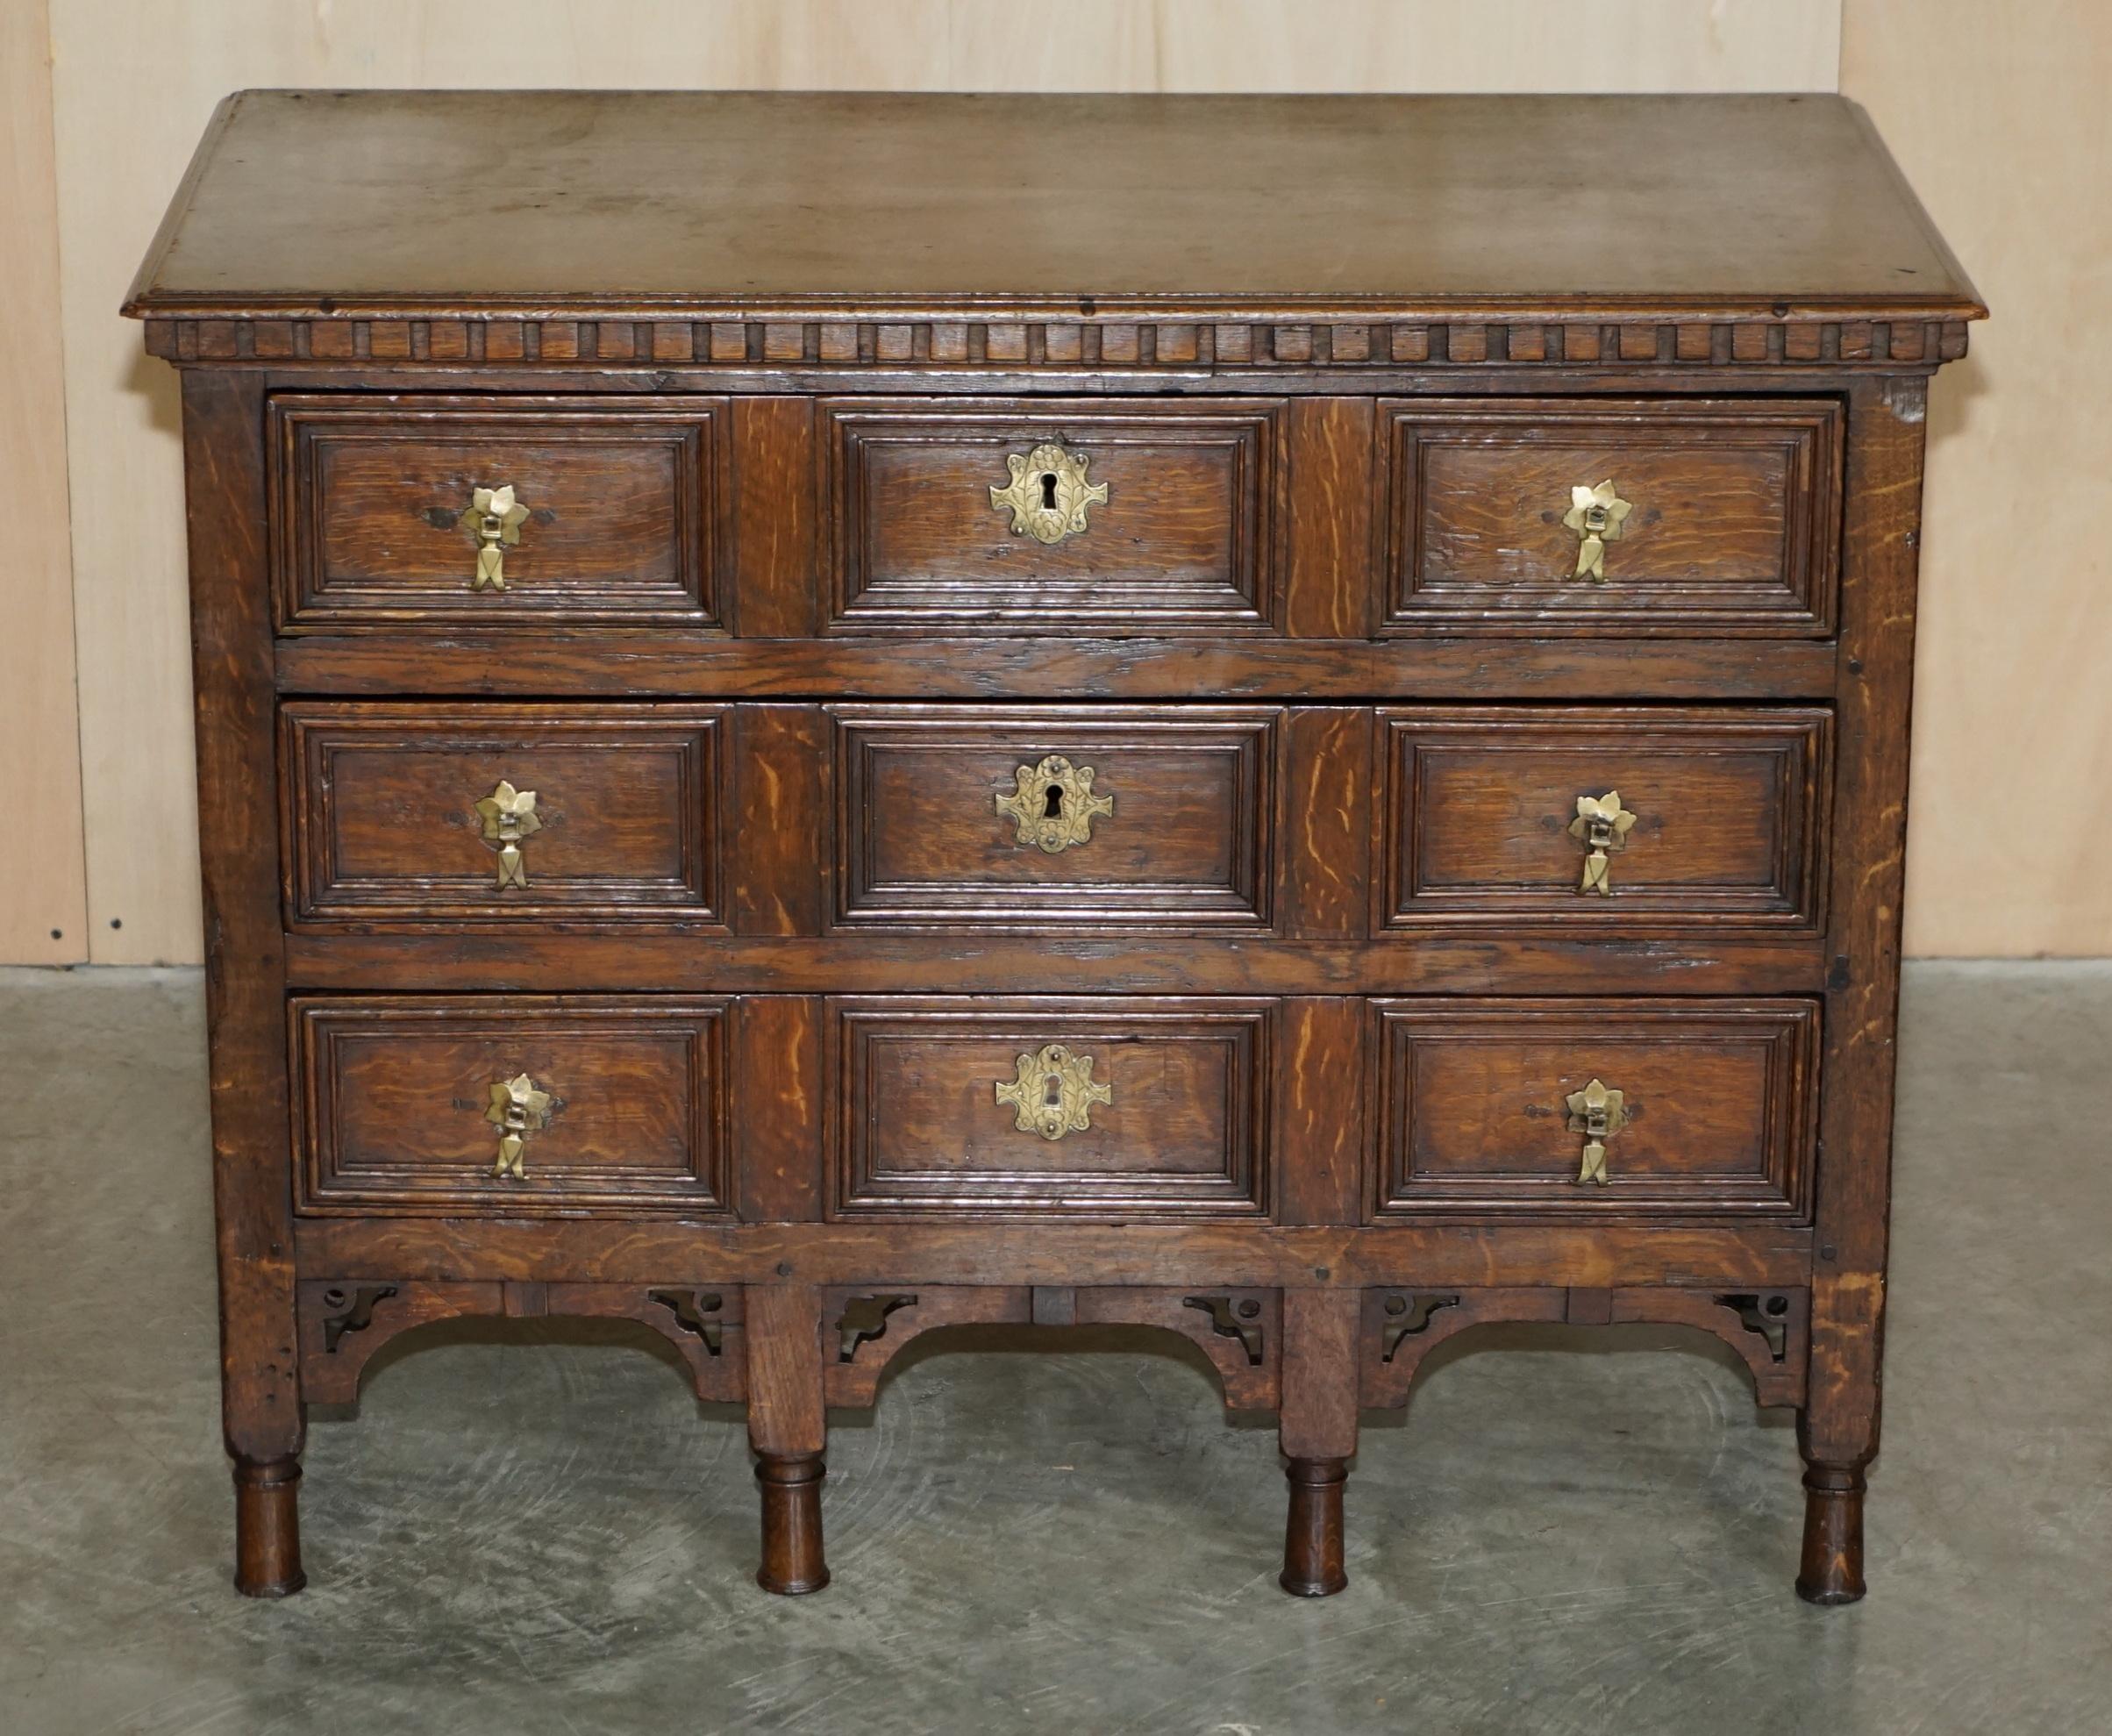 We are delighted to offer for sale this stunning antique Dutch circa 1720-1740 hand made chest of drawers.

A very decorative and well made chest of drawers which is 280-300 years old. It comes complete with original handles and very decorative